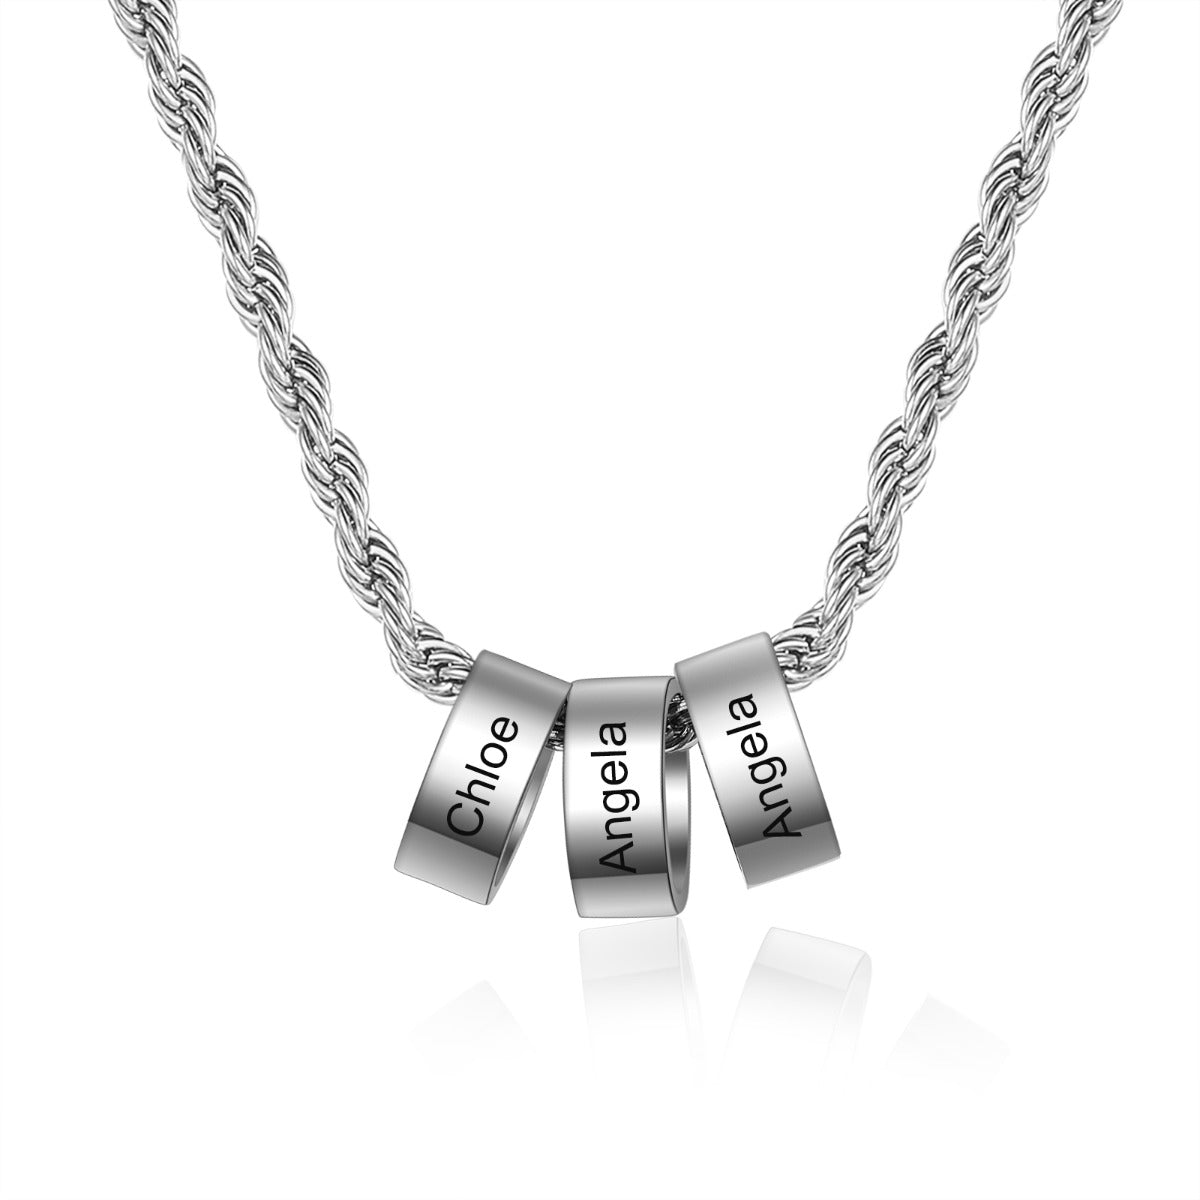 Engraving Stainless Steel Charm Bead Necklace